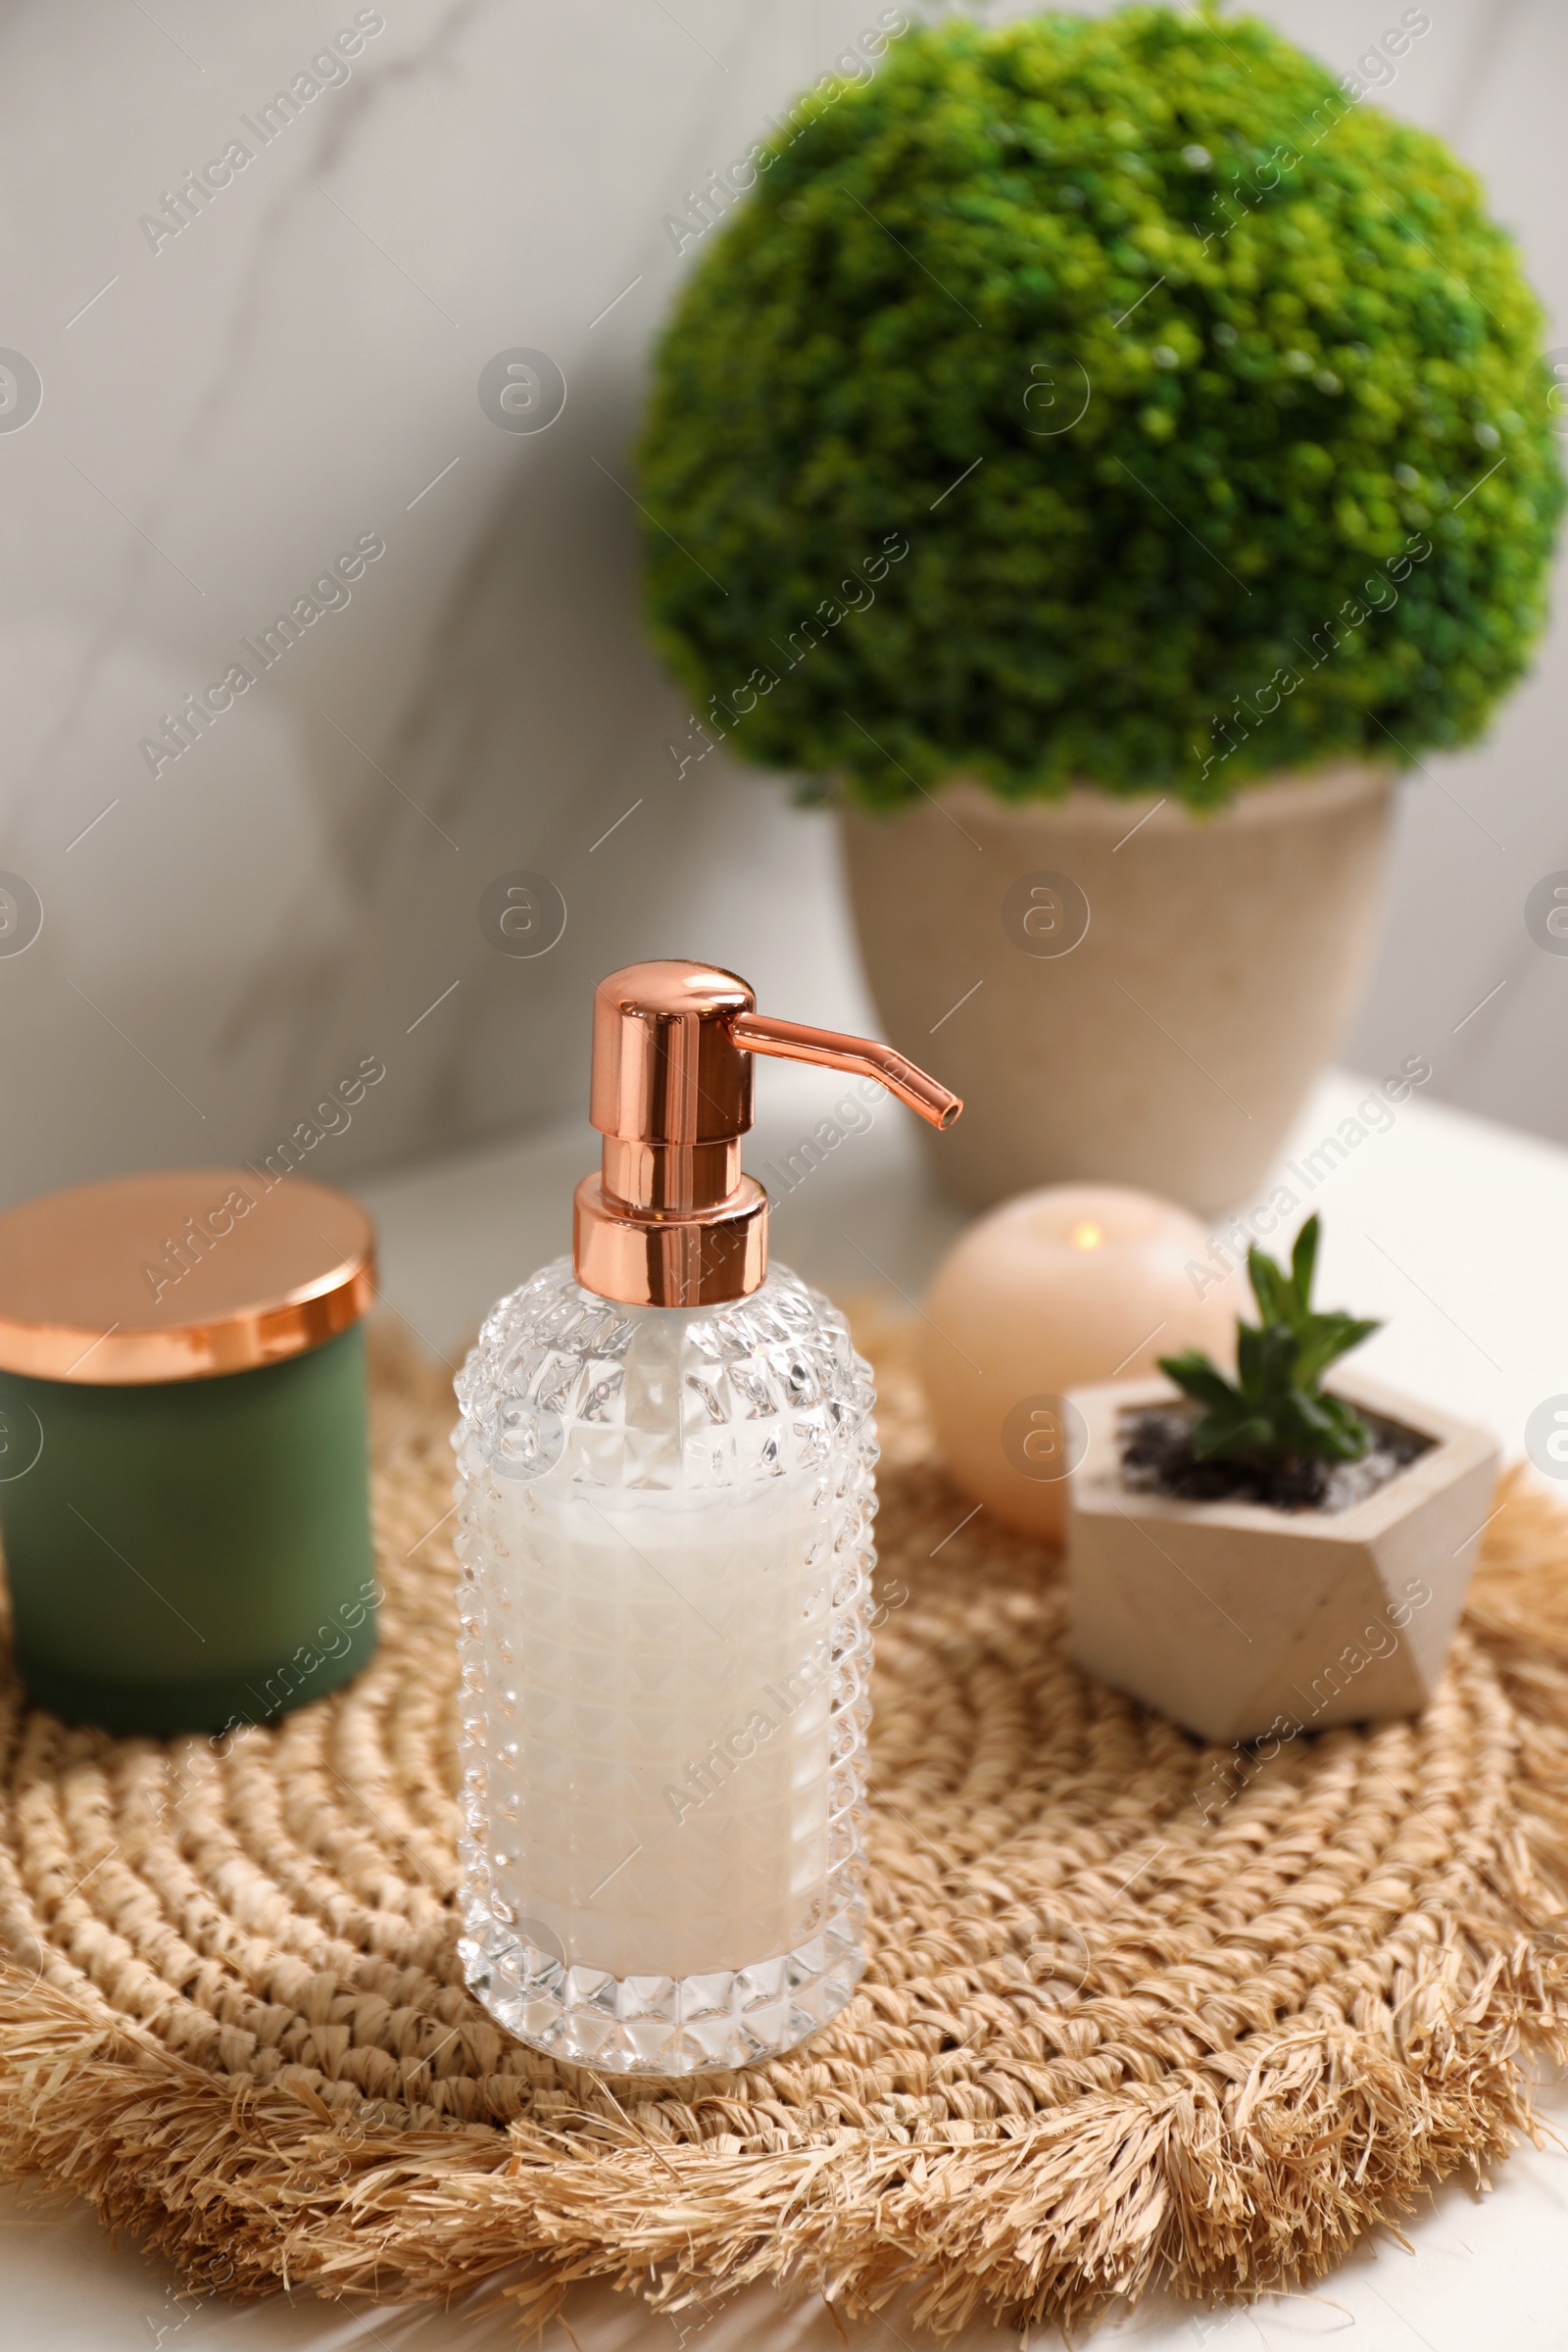 Photo of Soap dispenser and plants on countertop in bathroom